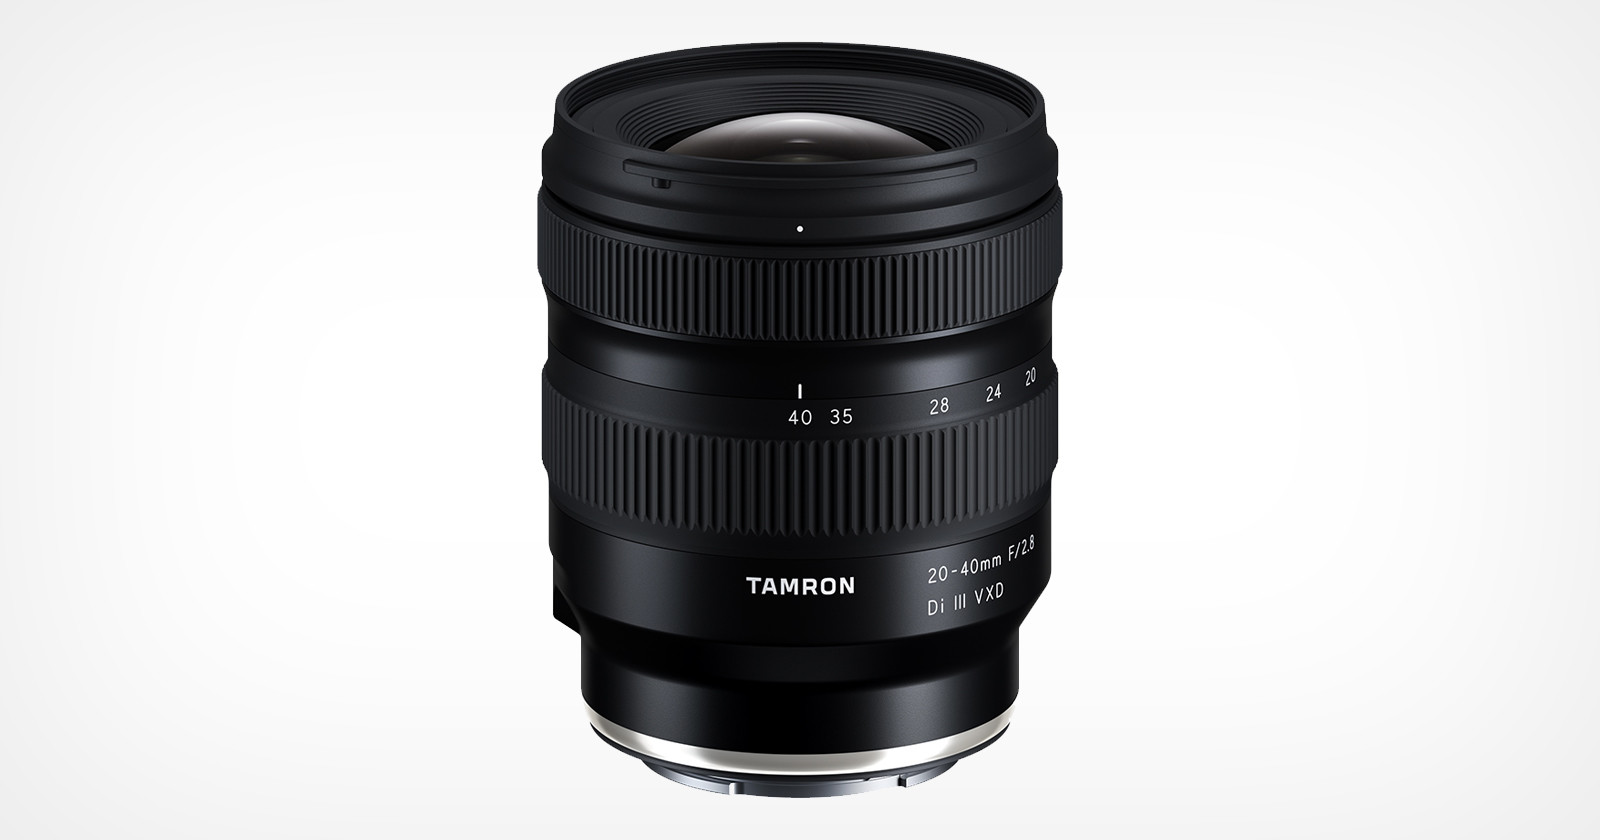 Tamron’s New 20-40mm f/2.8 Lens is the Smallest and Lightest in its Class